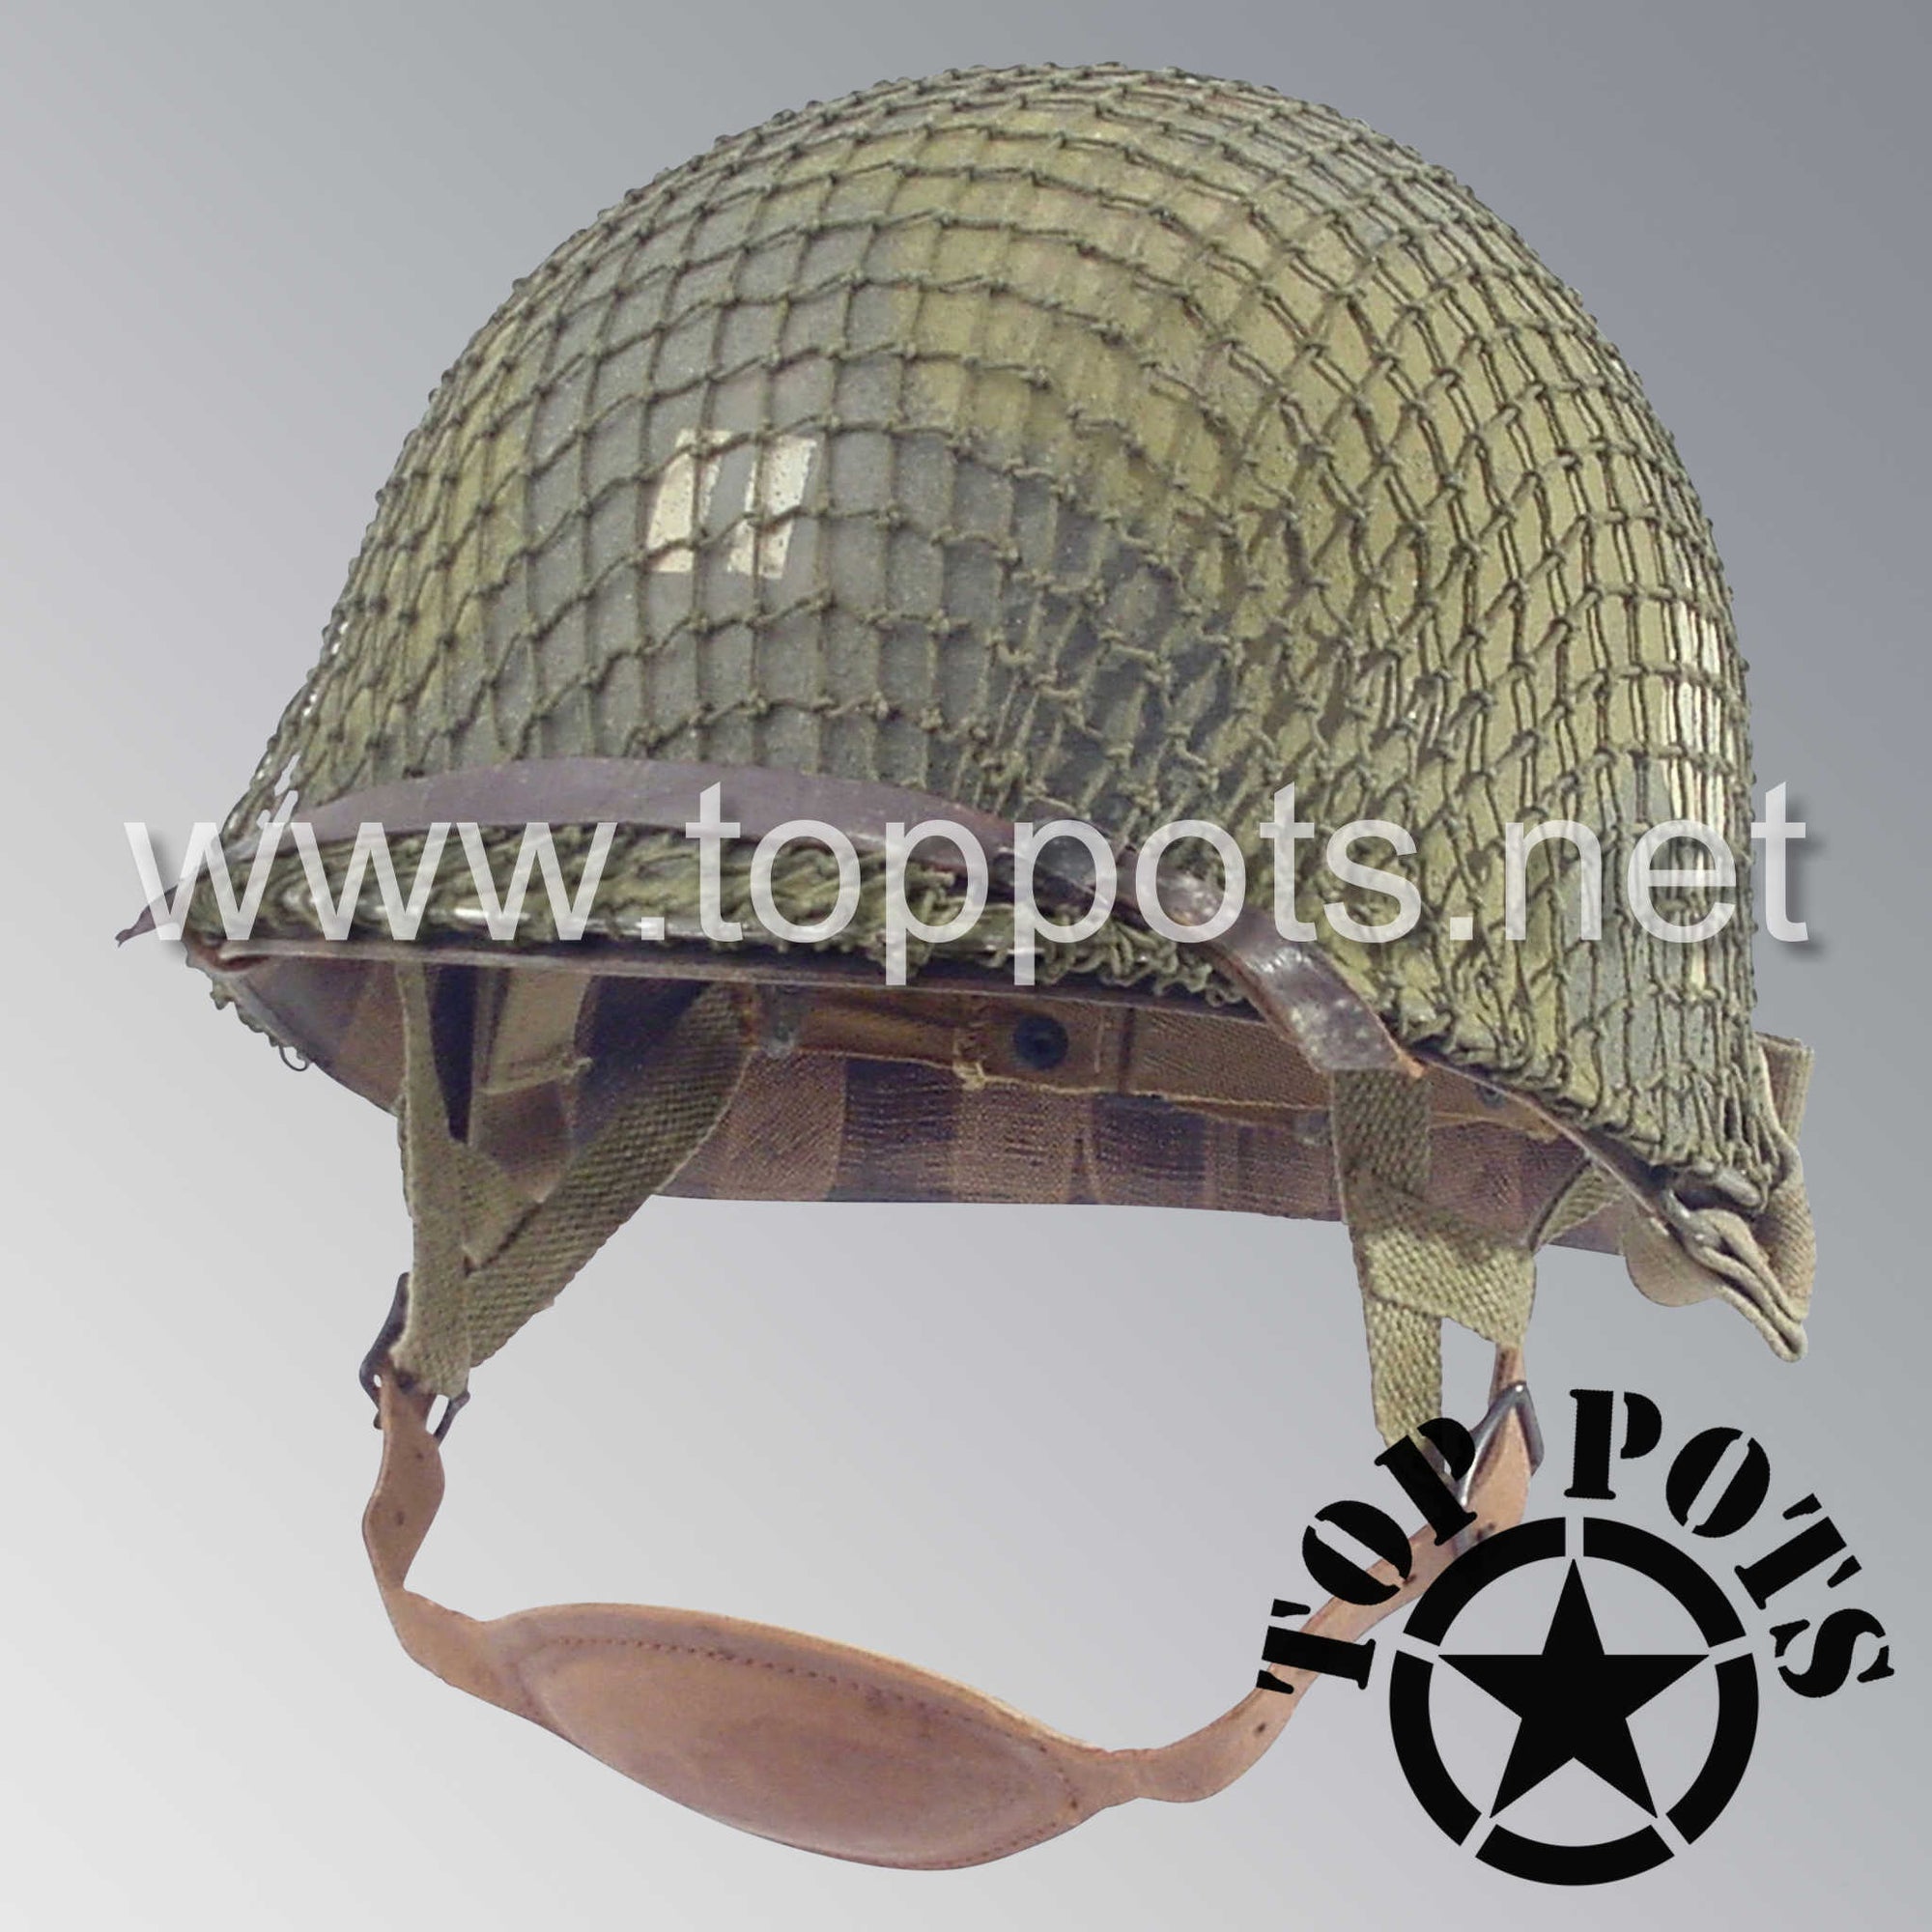 WWII US Army Aged Original M1C Paratrooper Airborne Helmet Swivel Bale Shell and Liner with 506th PIR 2nd Battalion Pathfinder Camouflage Emblem and Net